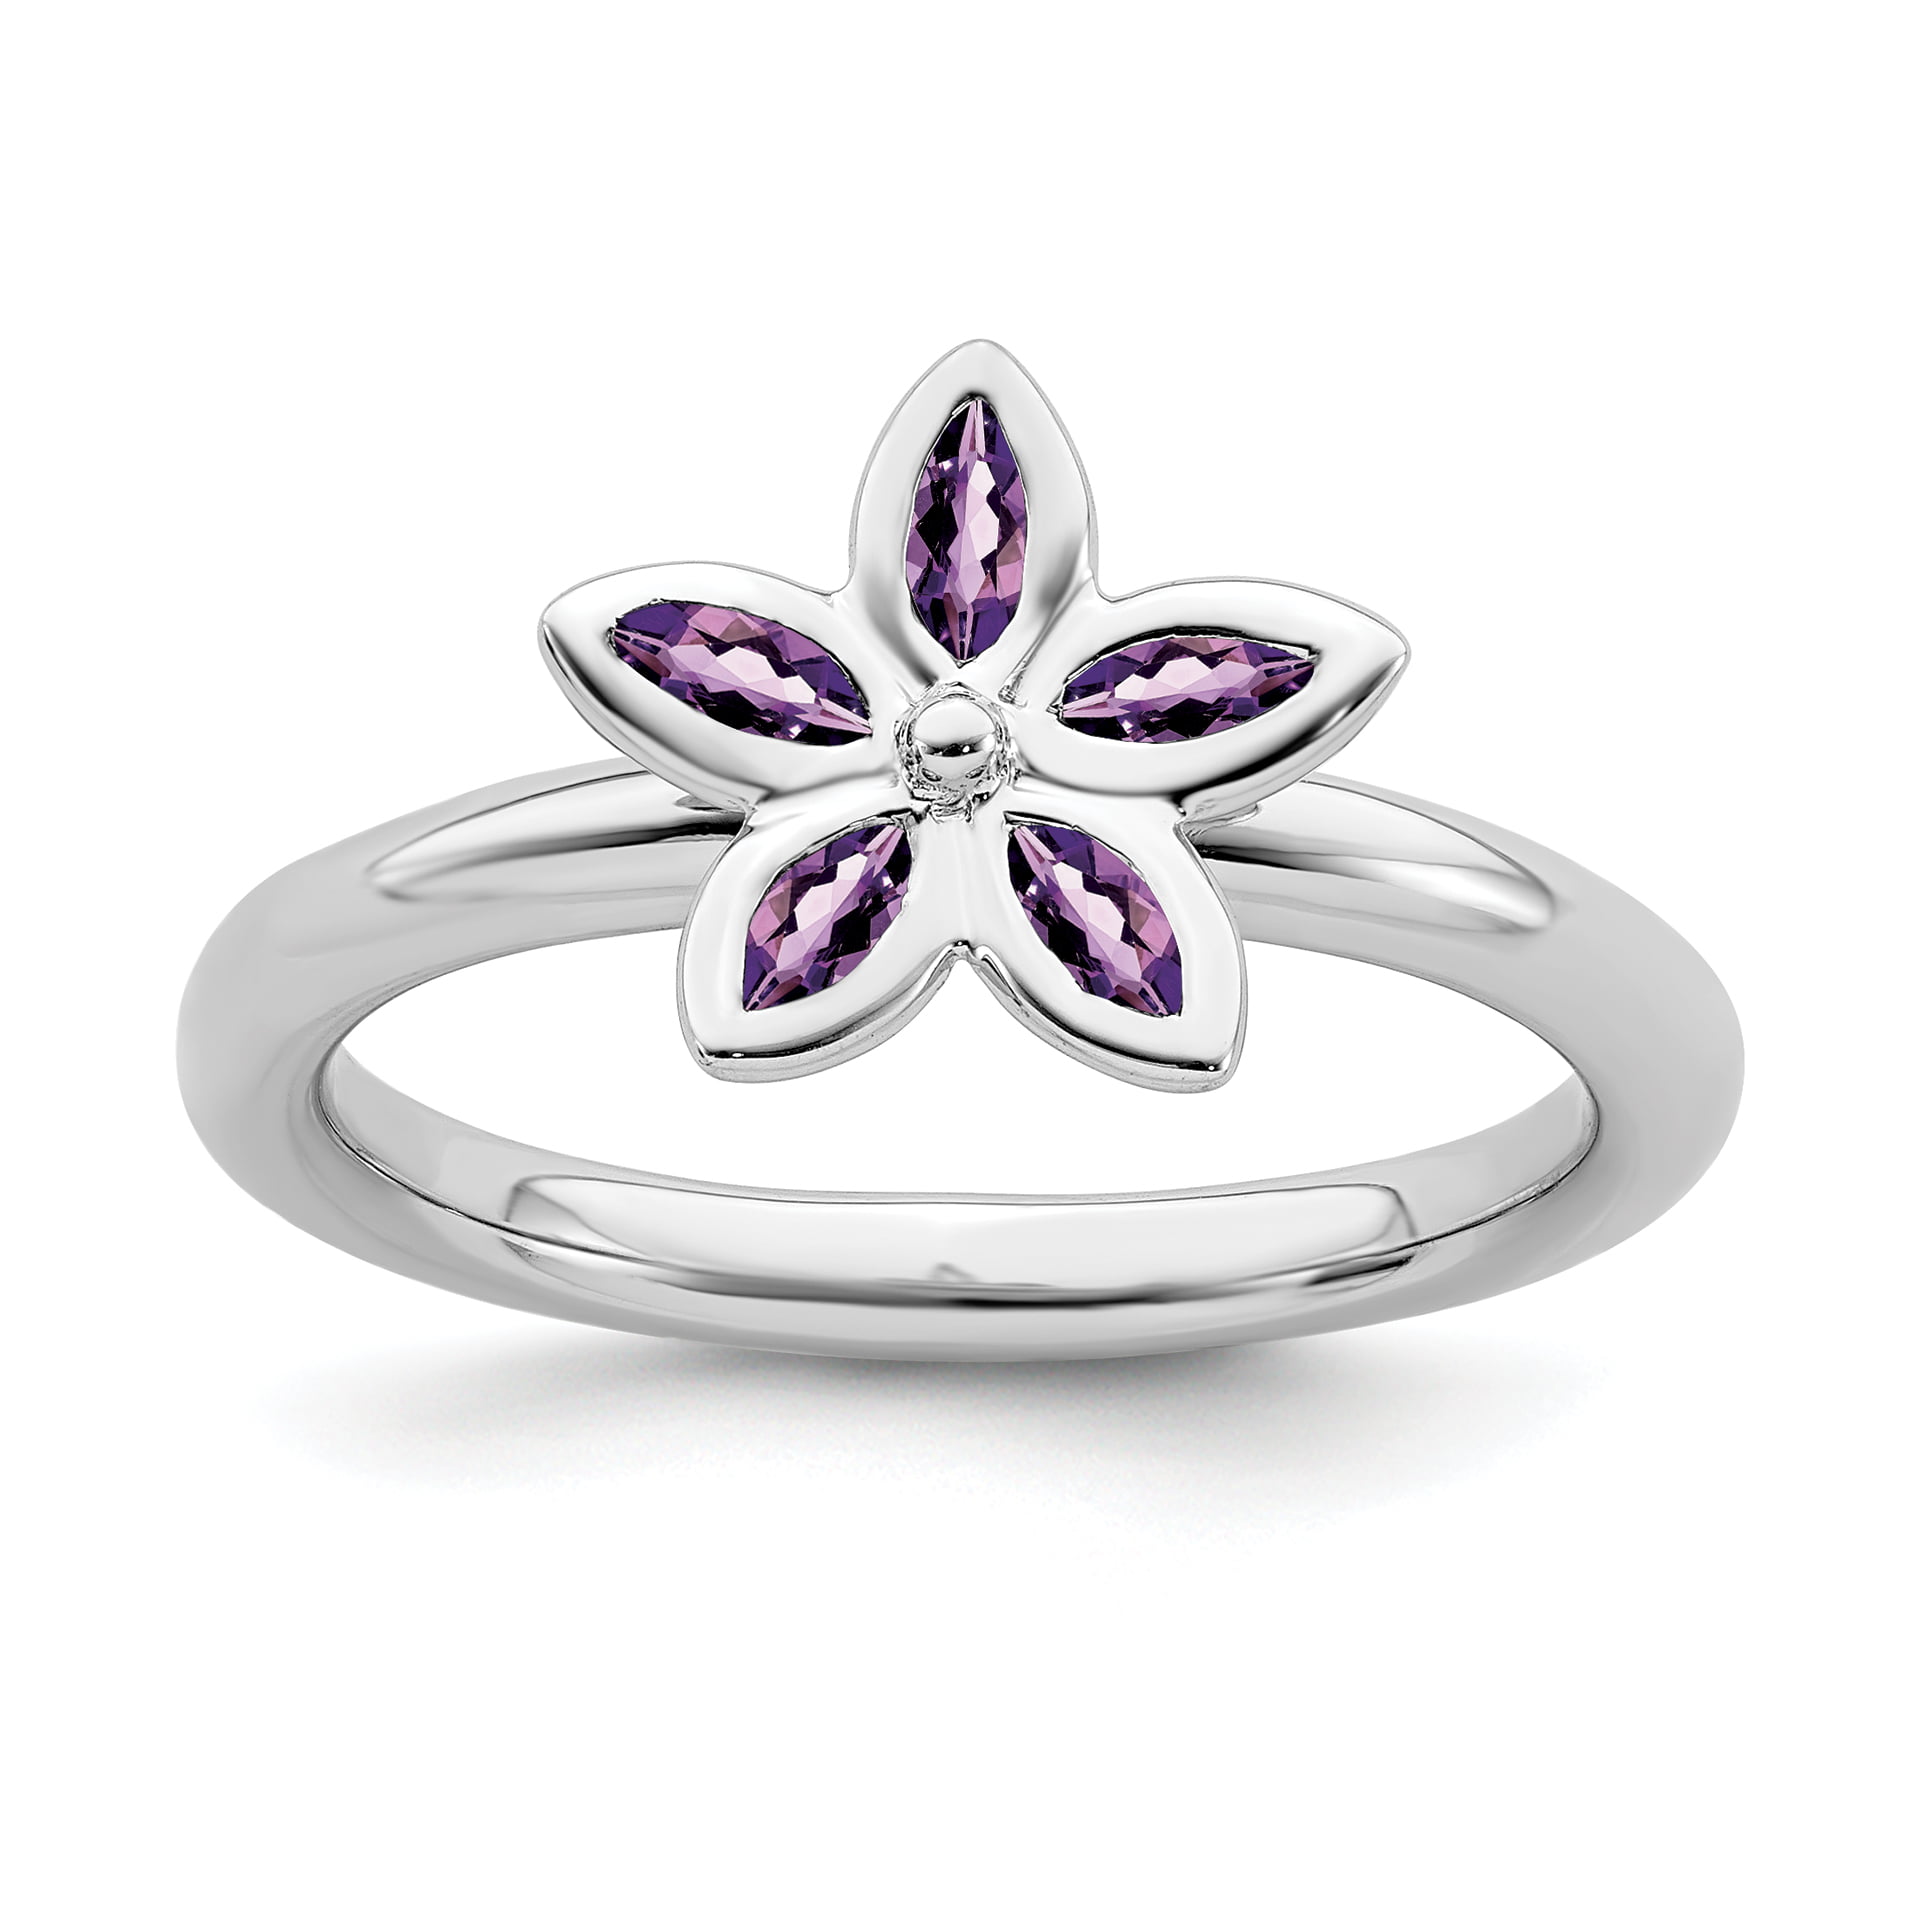 925 Sterling Silver Purple Amethyst Diamond Band Ring Size 7.00 Gemstone Fine Jewelry For Women Gifts For Her